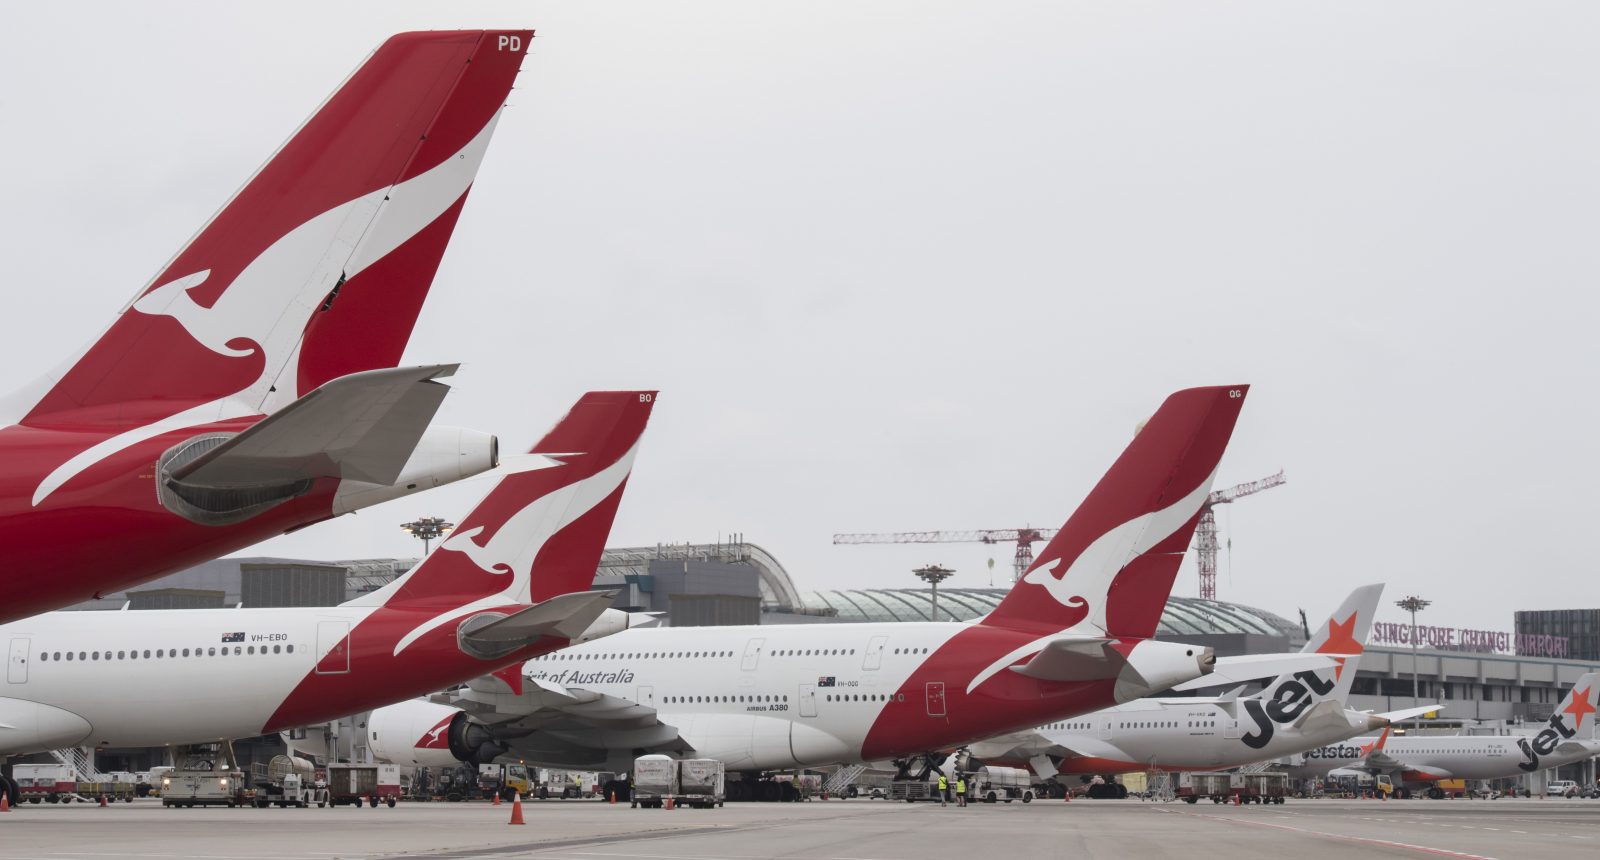 Former Qantas Flight Attendant Says Sexual Harassment Is "Rampant": Quits Job After Alleged Assault